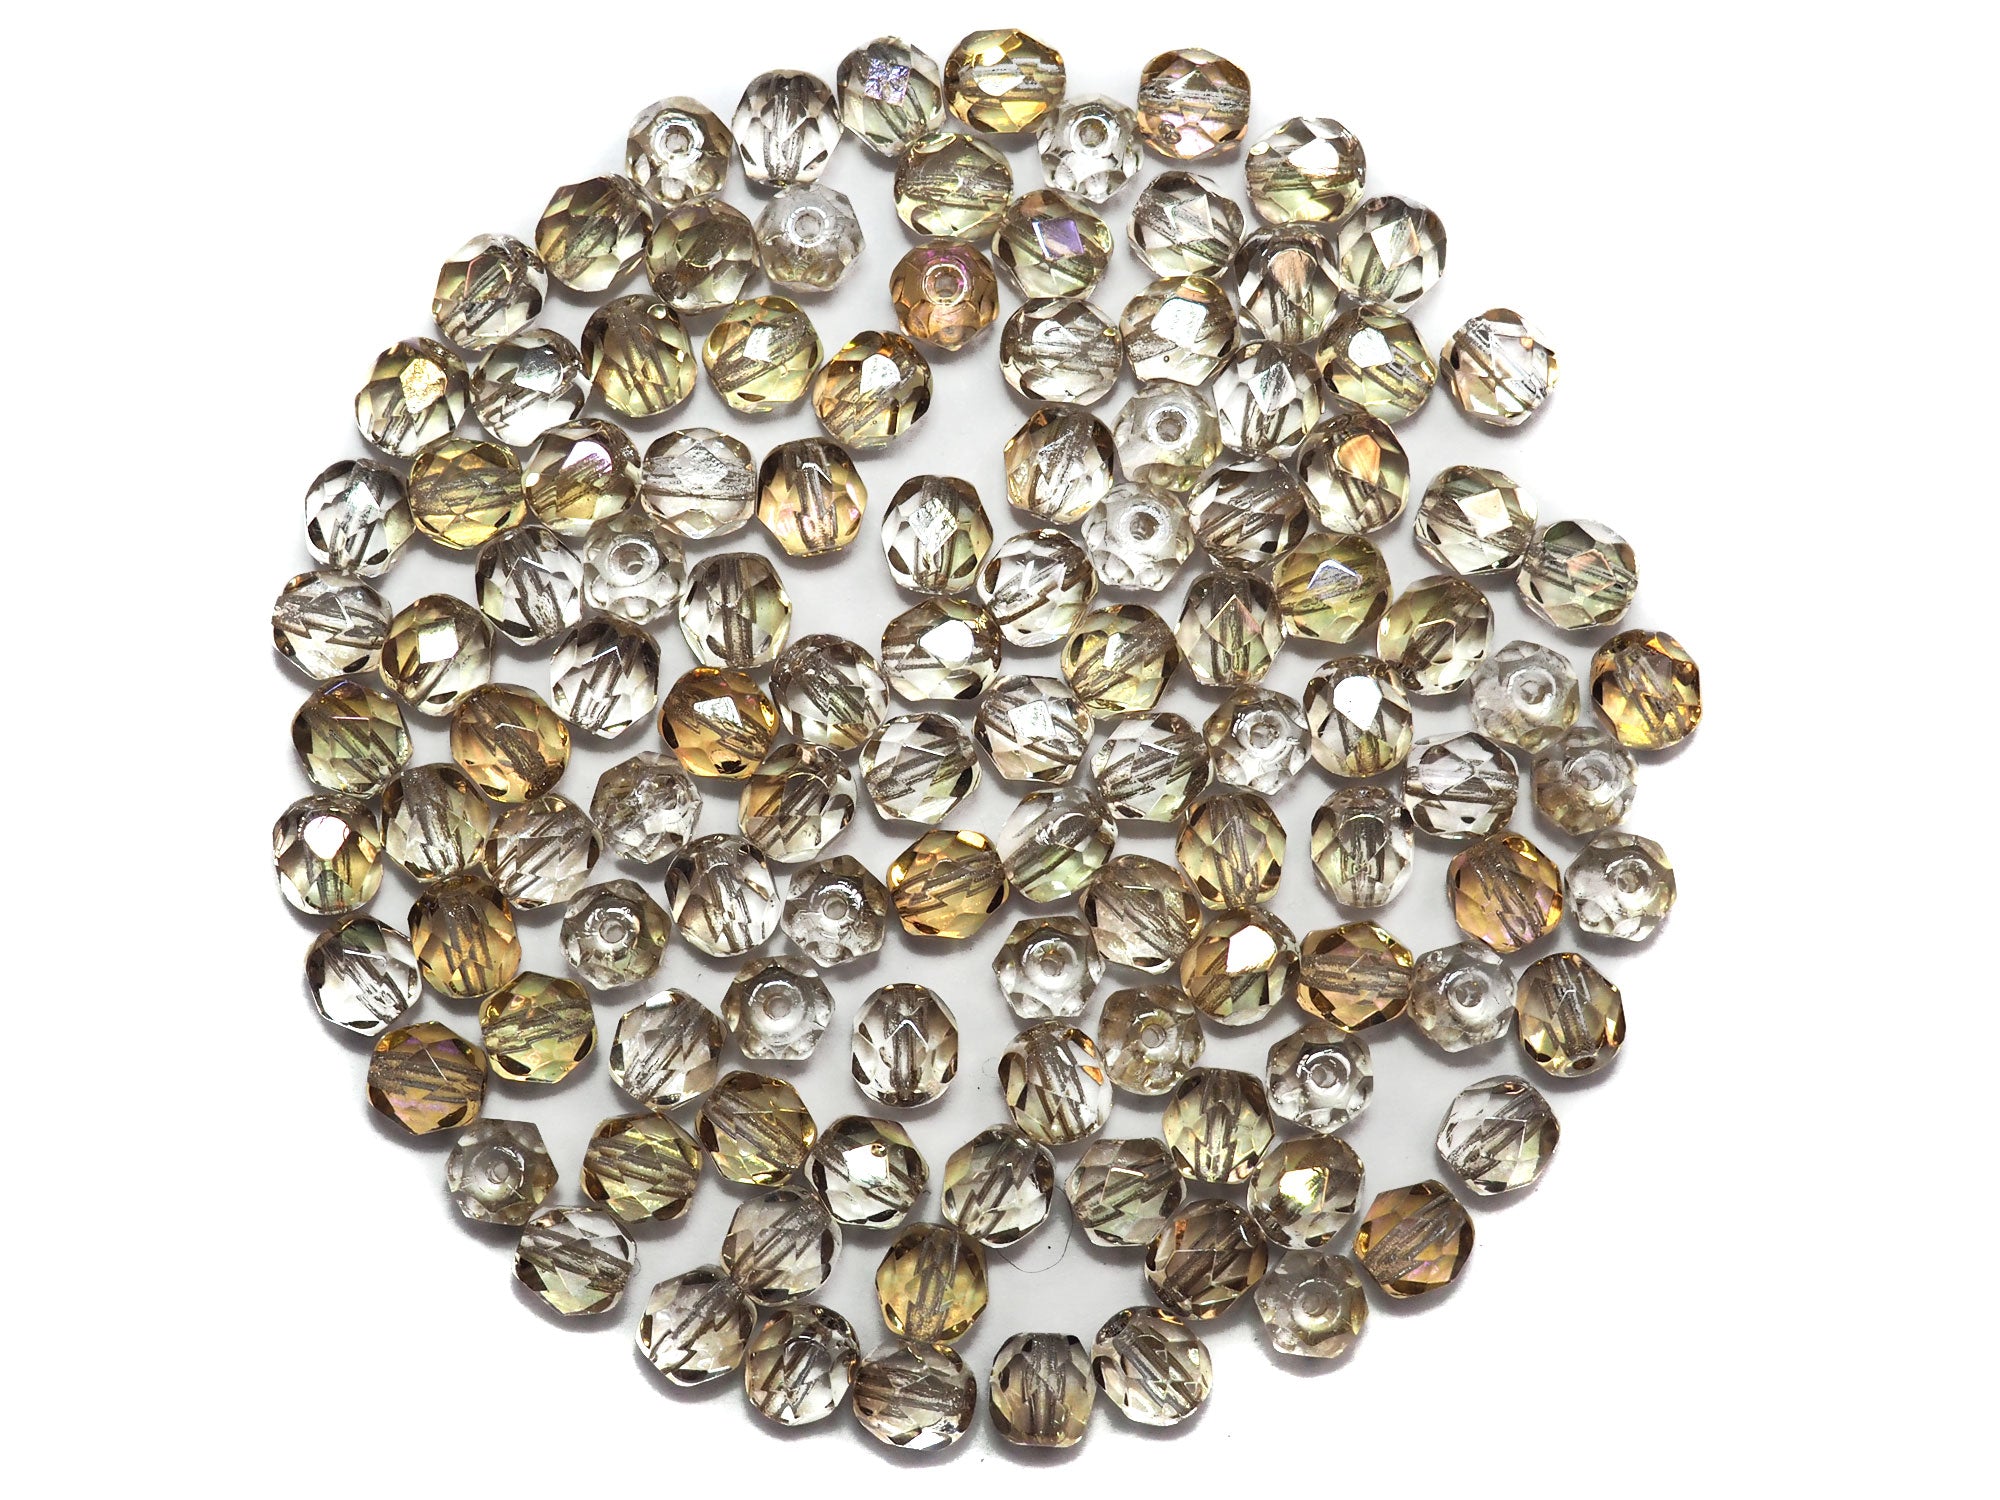 Crystal Golden Luster coated, Czech Fire Polished Round Faceted Glass Beads, 6mm 60pcs, P499